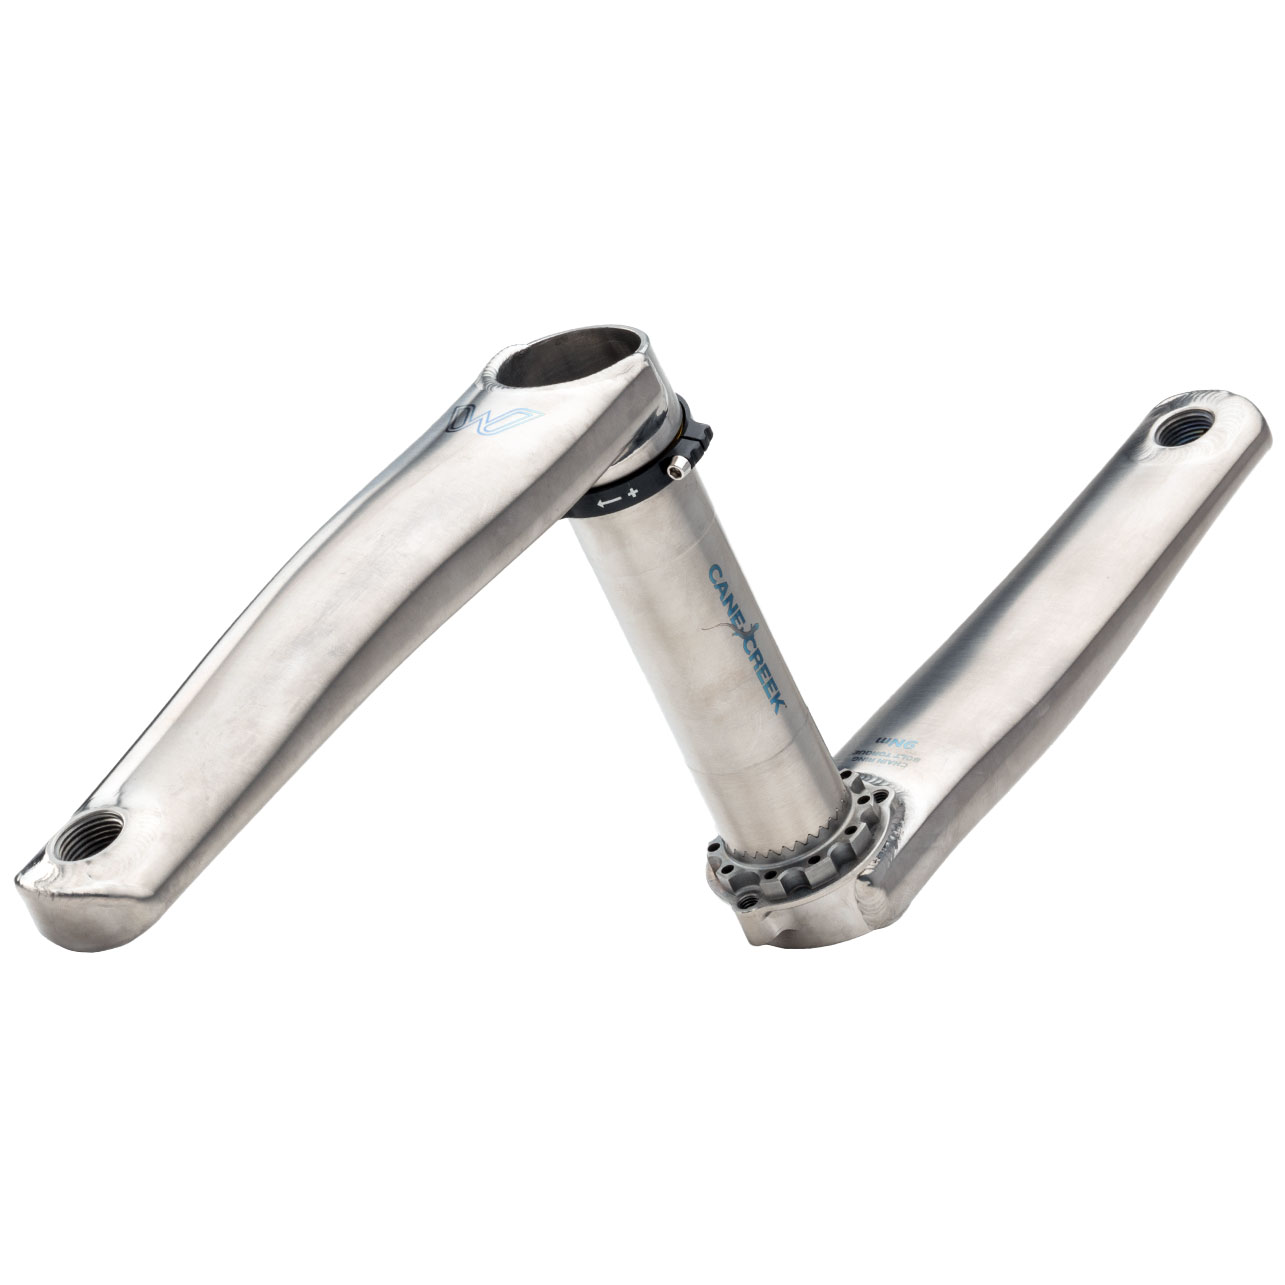 Cane Creek eeWings Ti Cranks 165mm, 3-Bolt, 30mm Spindle